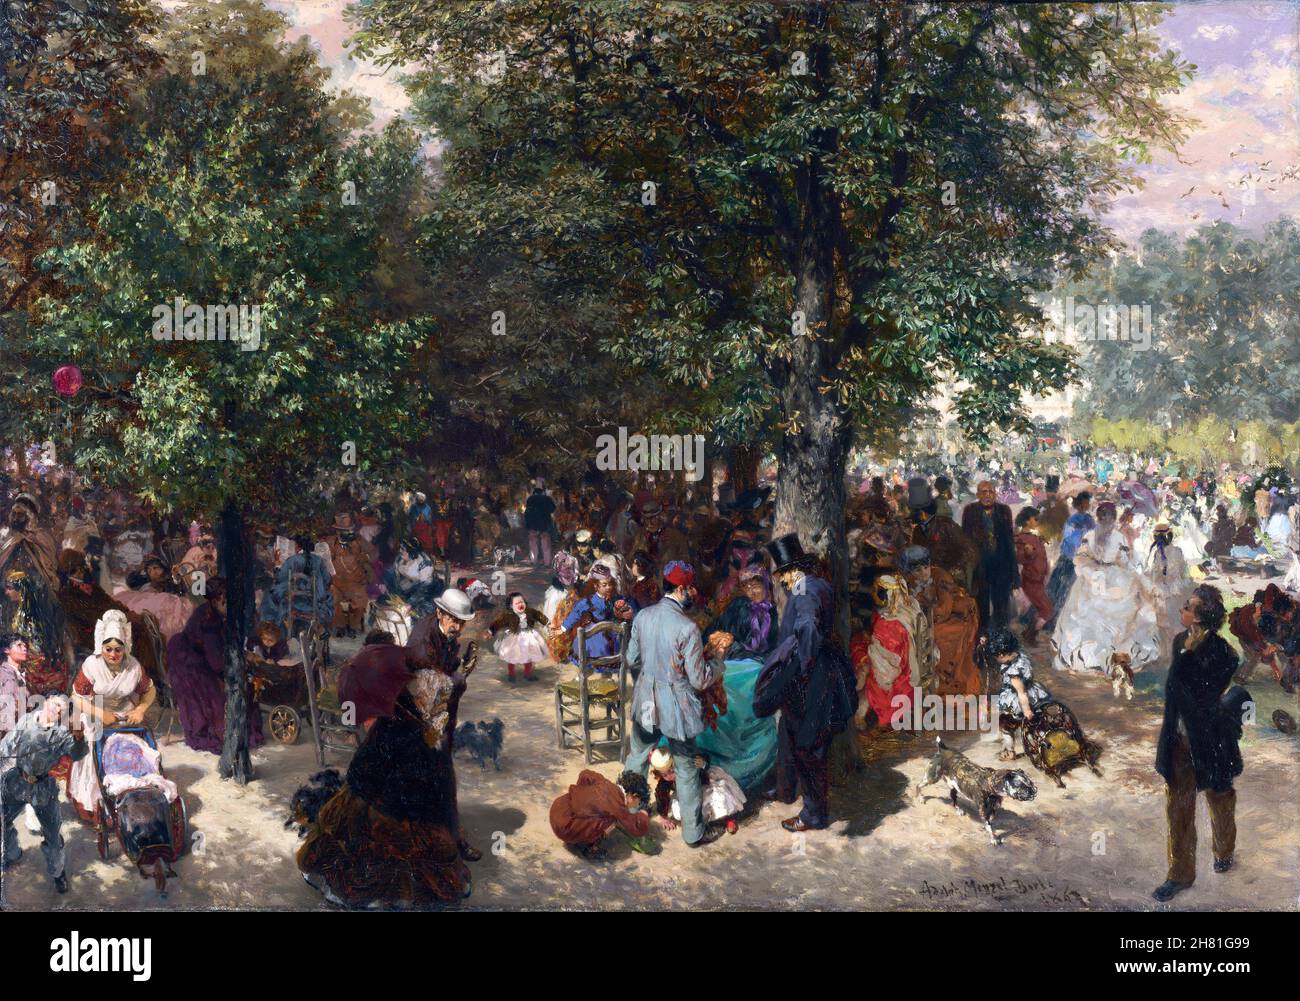 Afternoon in the Tuileries Gardens by Adolph von Menzel (1815-1905), oil on canvas, 1867 Stock Photo